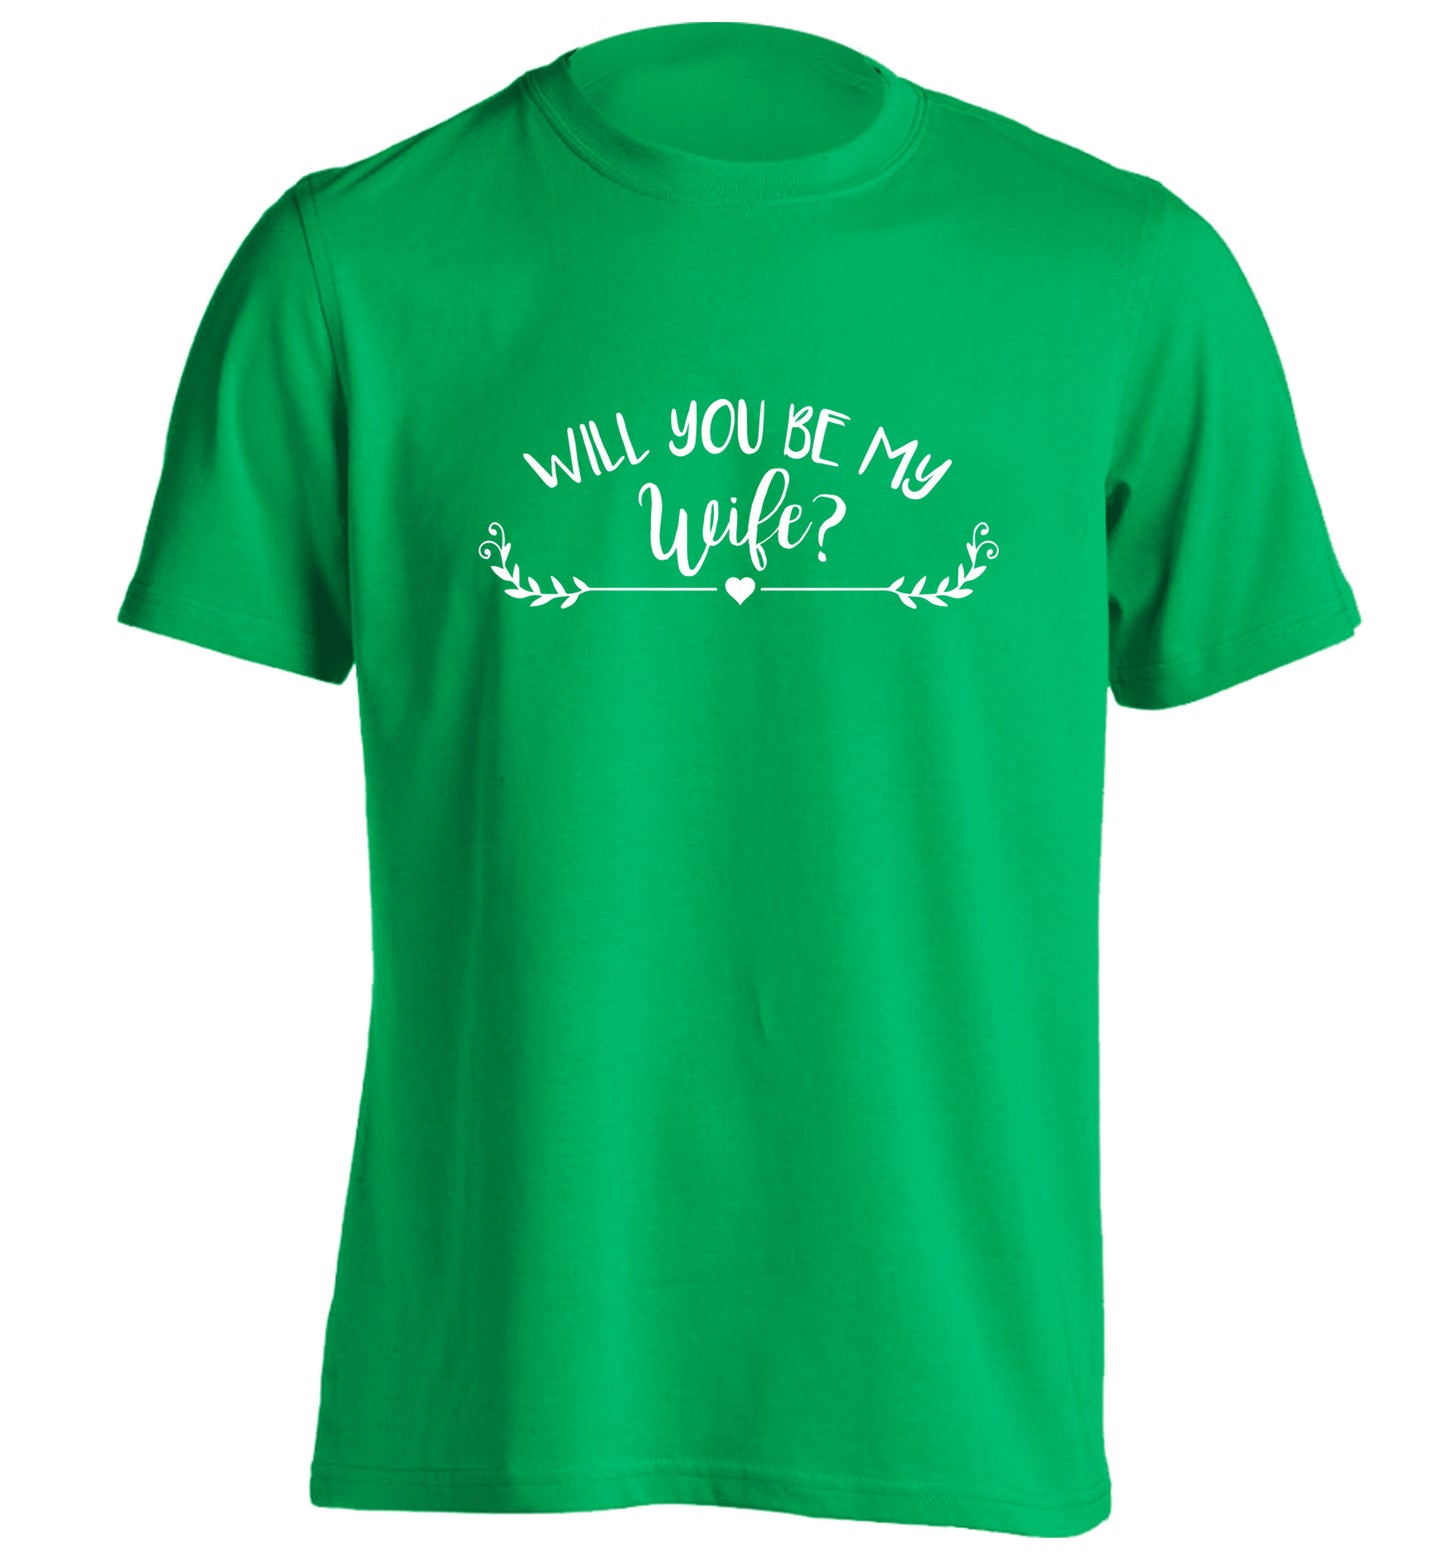 Will you be my wife? adults unisex green Tshirt 2XL